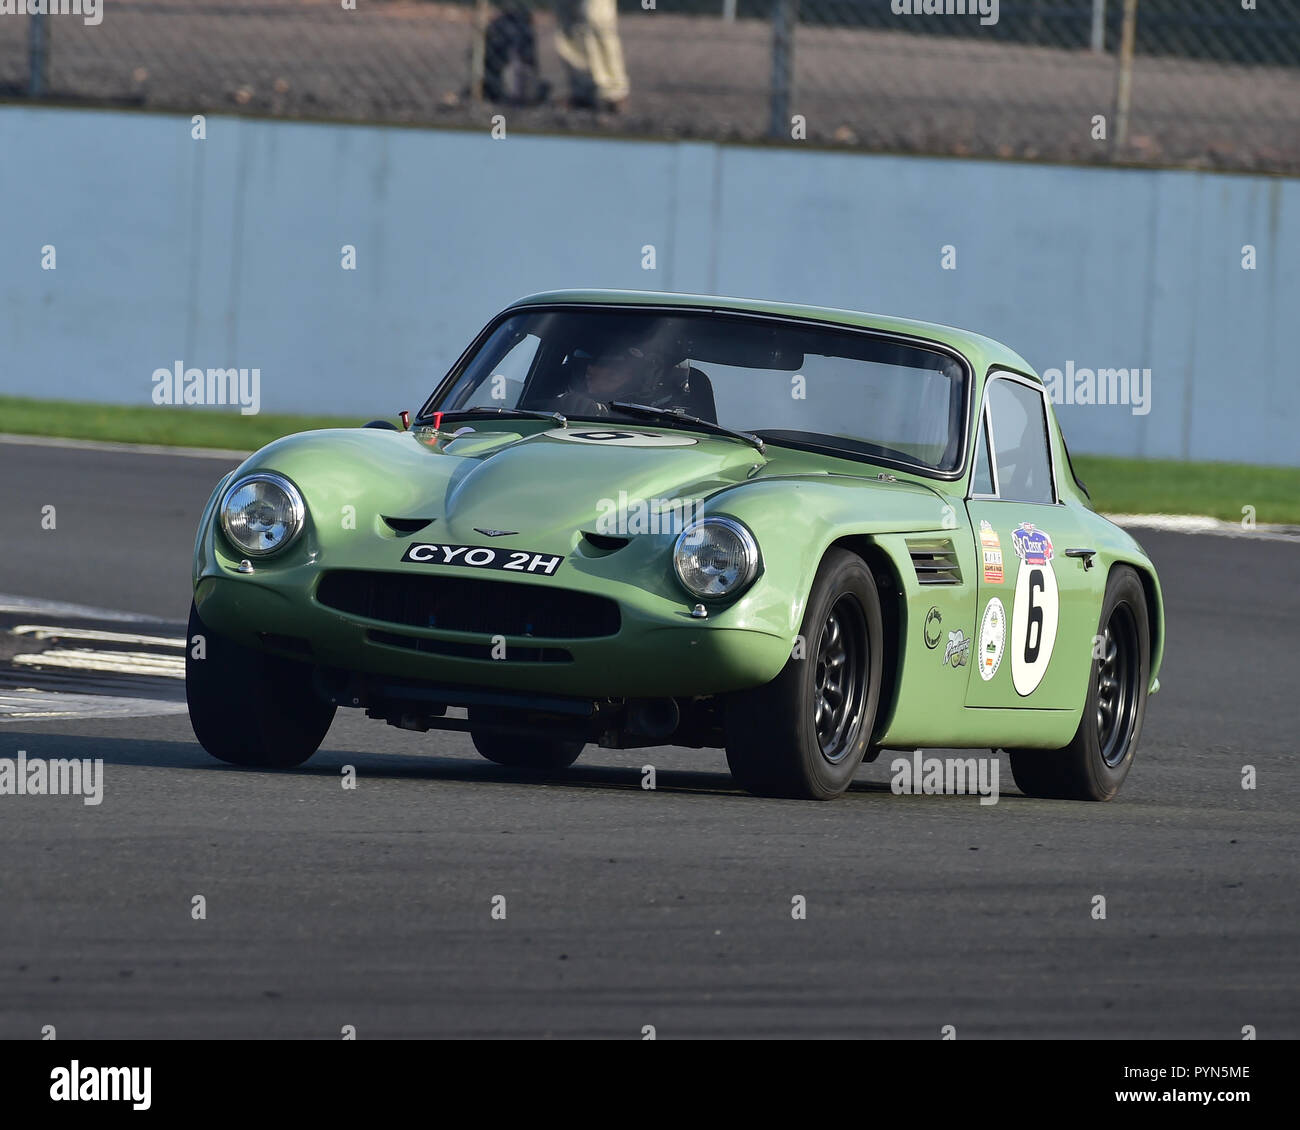 Johan Denekamp, TVR Tuscan, Historic Road Sports, Silverstone Finals Historic Race Meeting, Silverstone, October 2018, cars, Classic Racing Cars, Hist Stock Photo